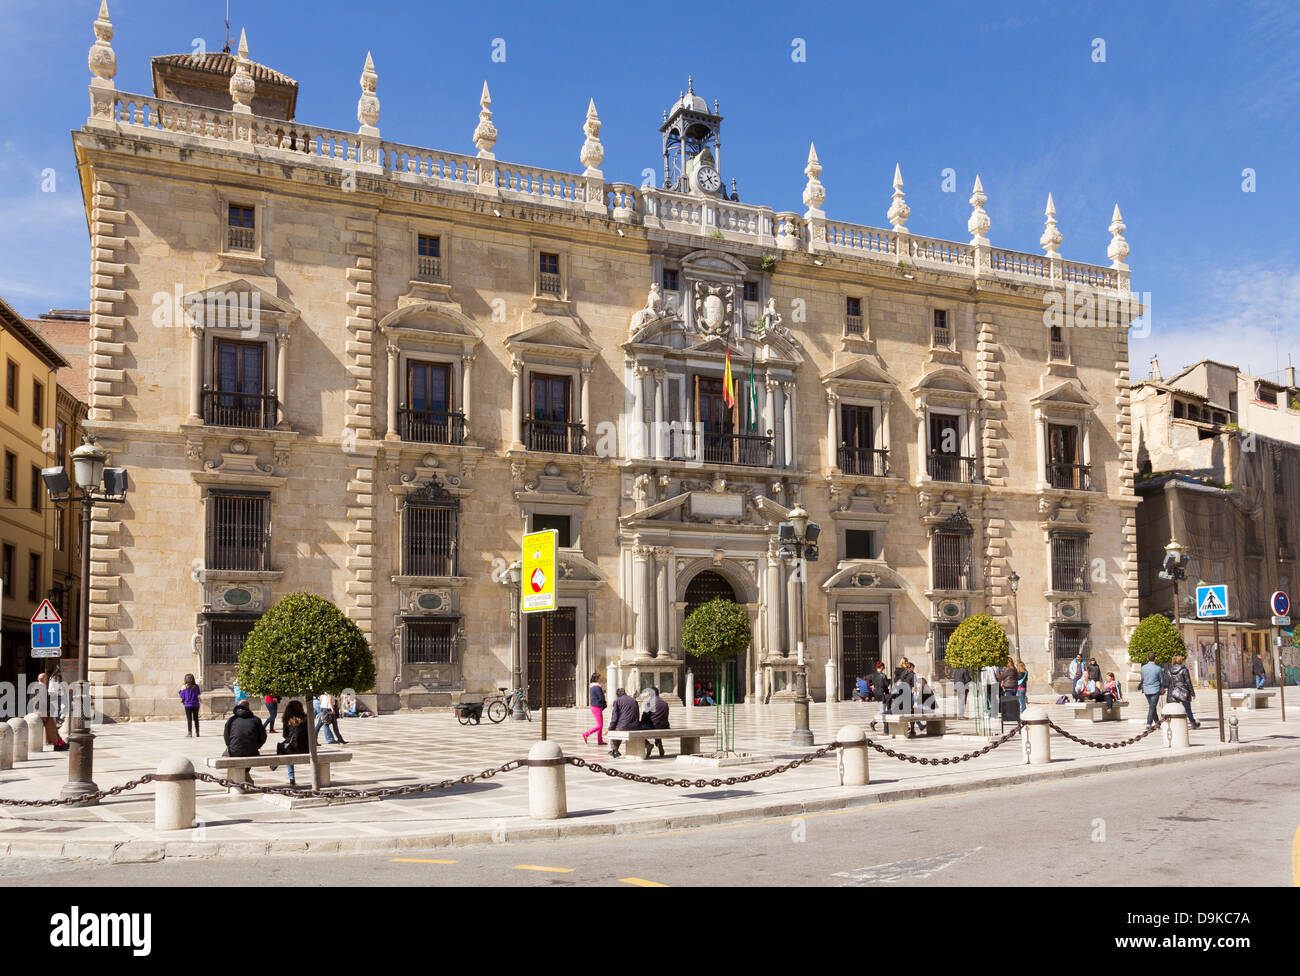 In Plaza Nueva, city of Granada, Real Chancilleria, Town Hall and Courts of Justice dating from the 16th century Stock Photo